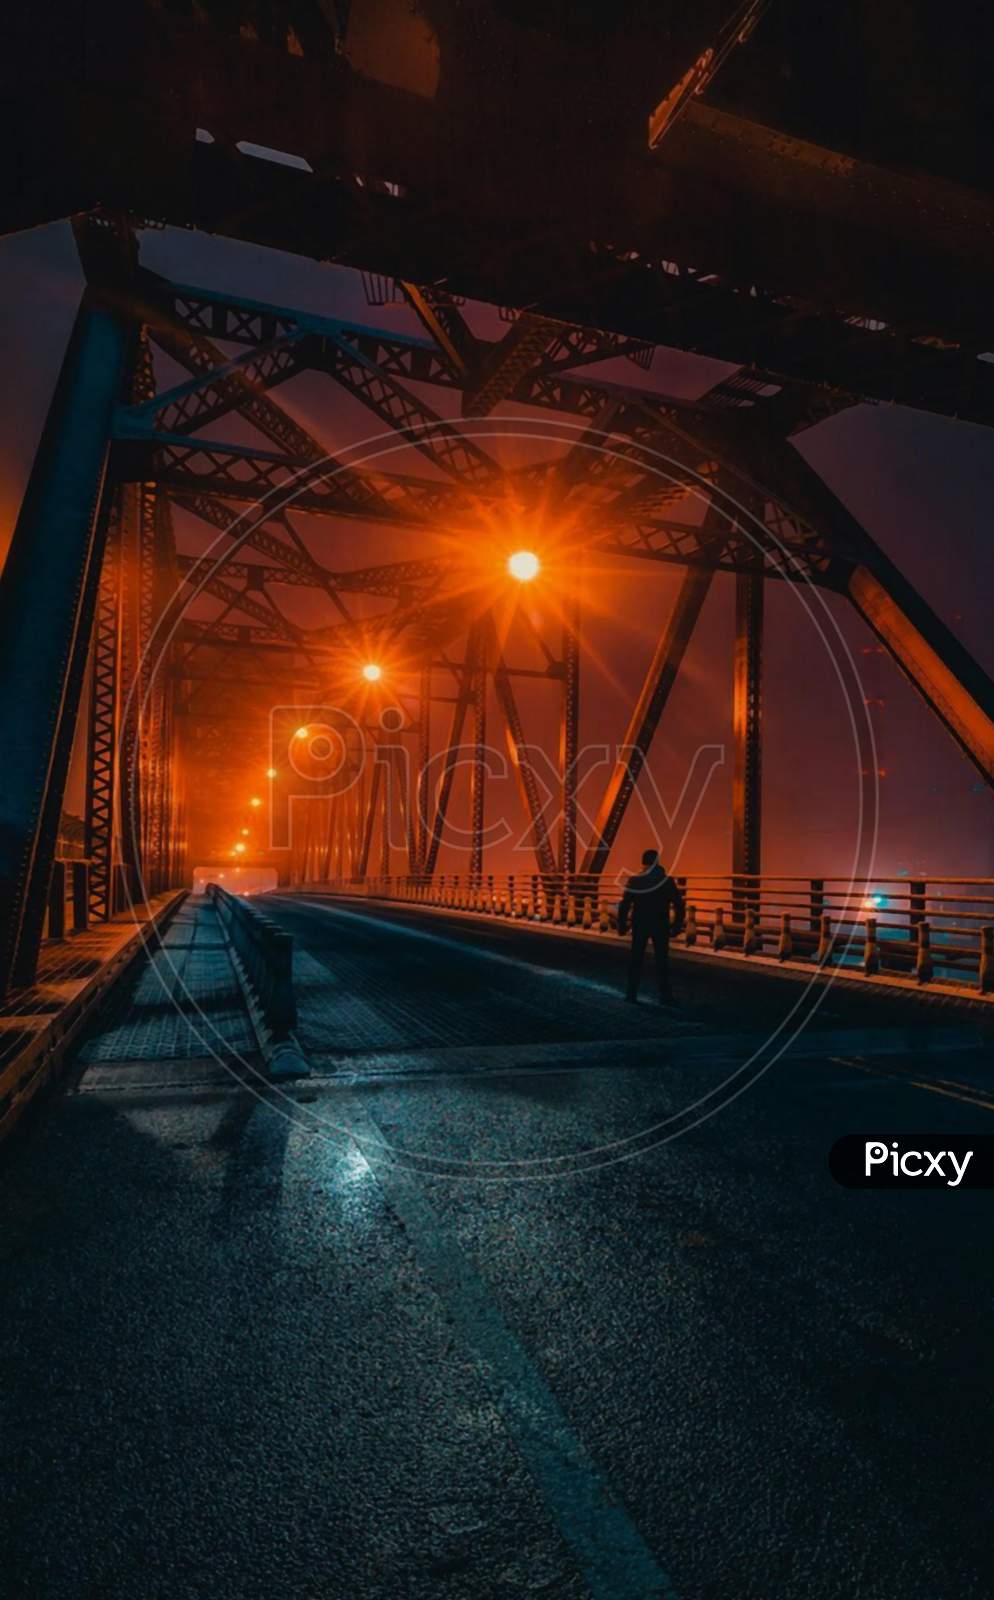 Real Pubg bridge night pic with a man standing on the road